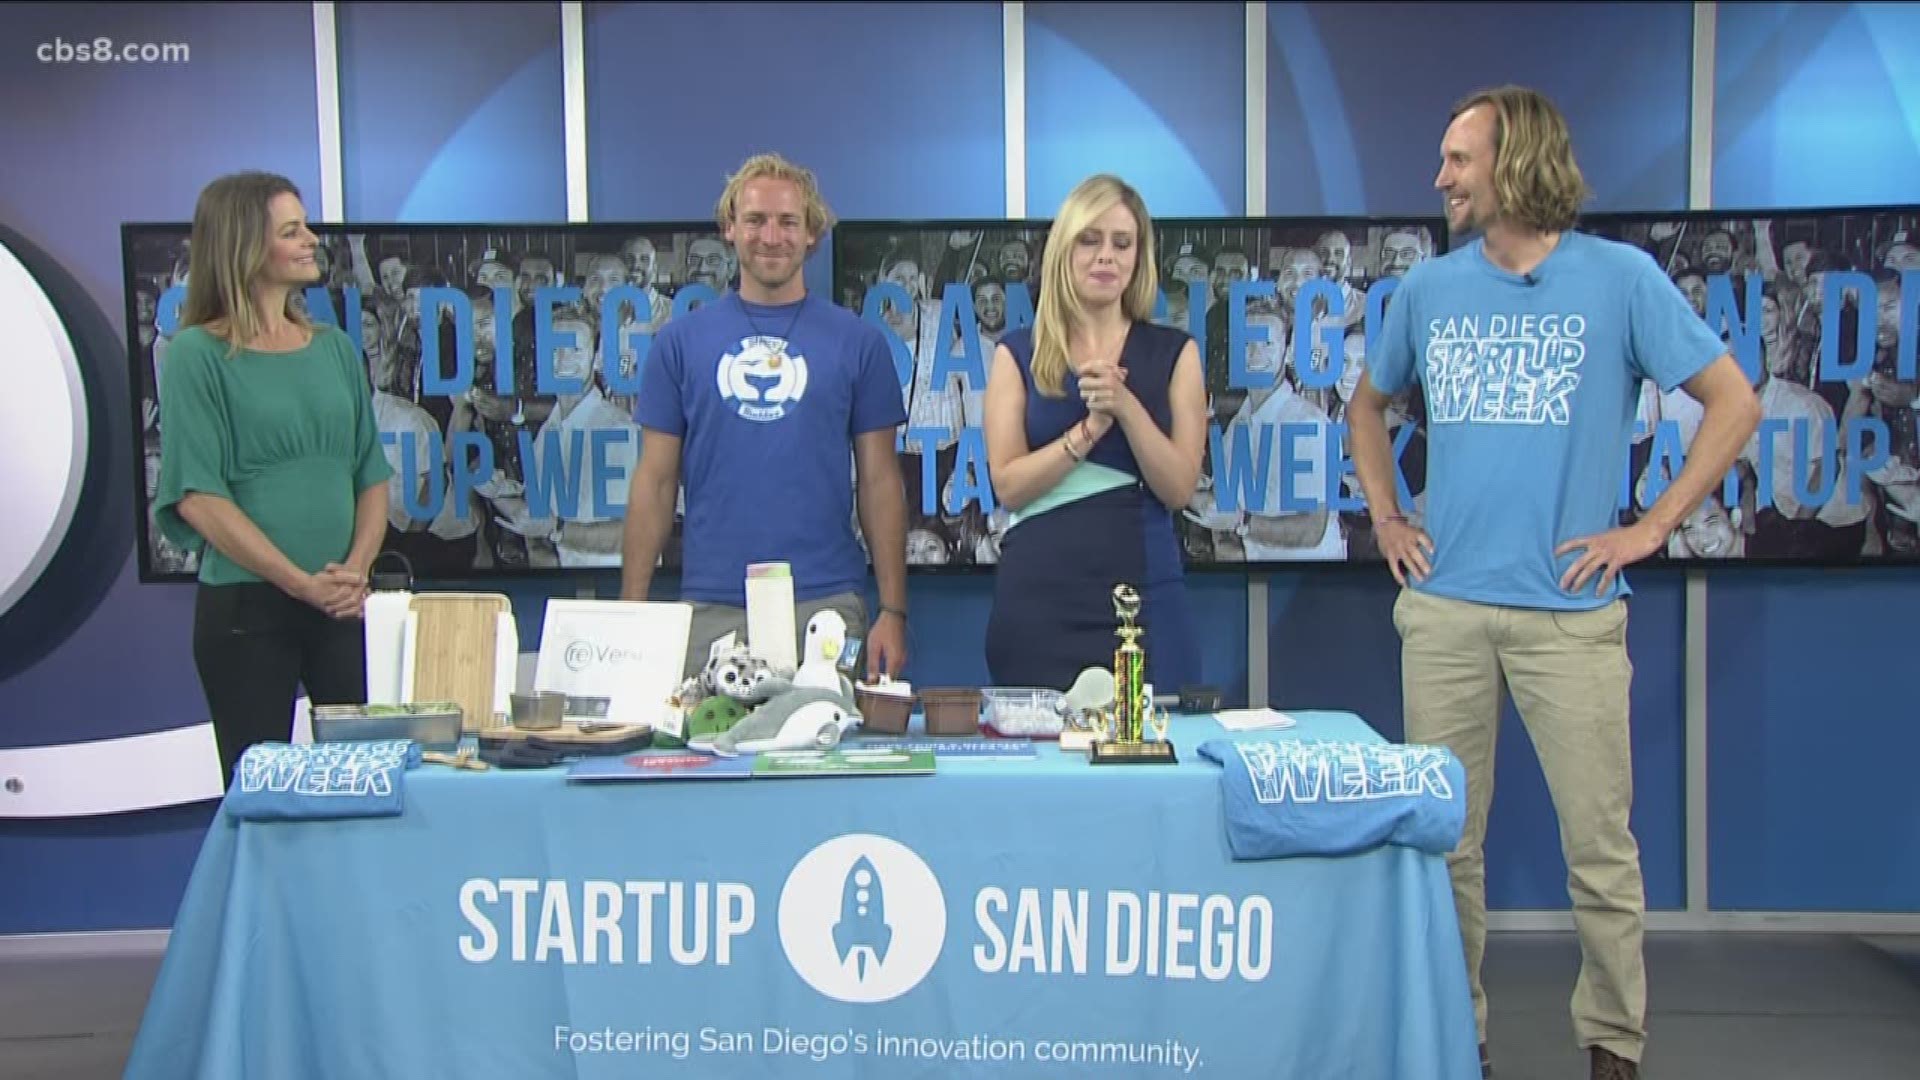 SDSW’s Executive Director Jarrod Russell along with several startup founders stopped by Morning Extra with more information on the week's events.